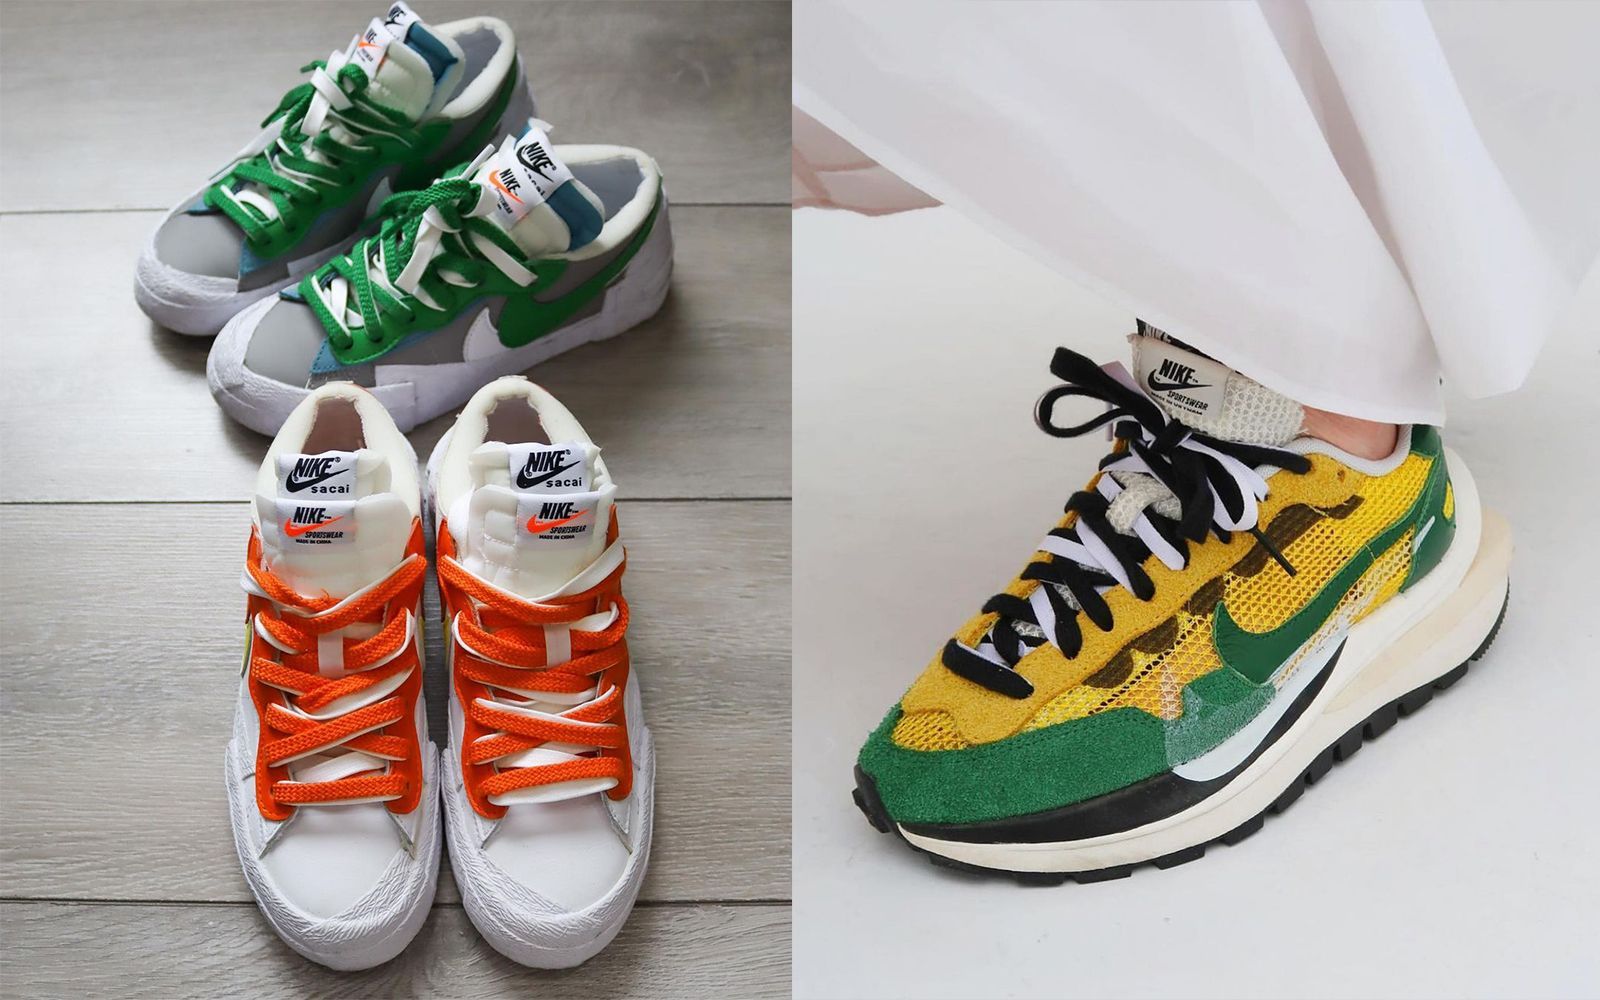 A complete history of sacai x Nike collaborations